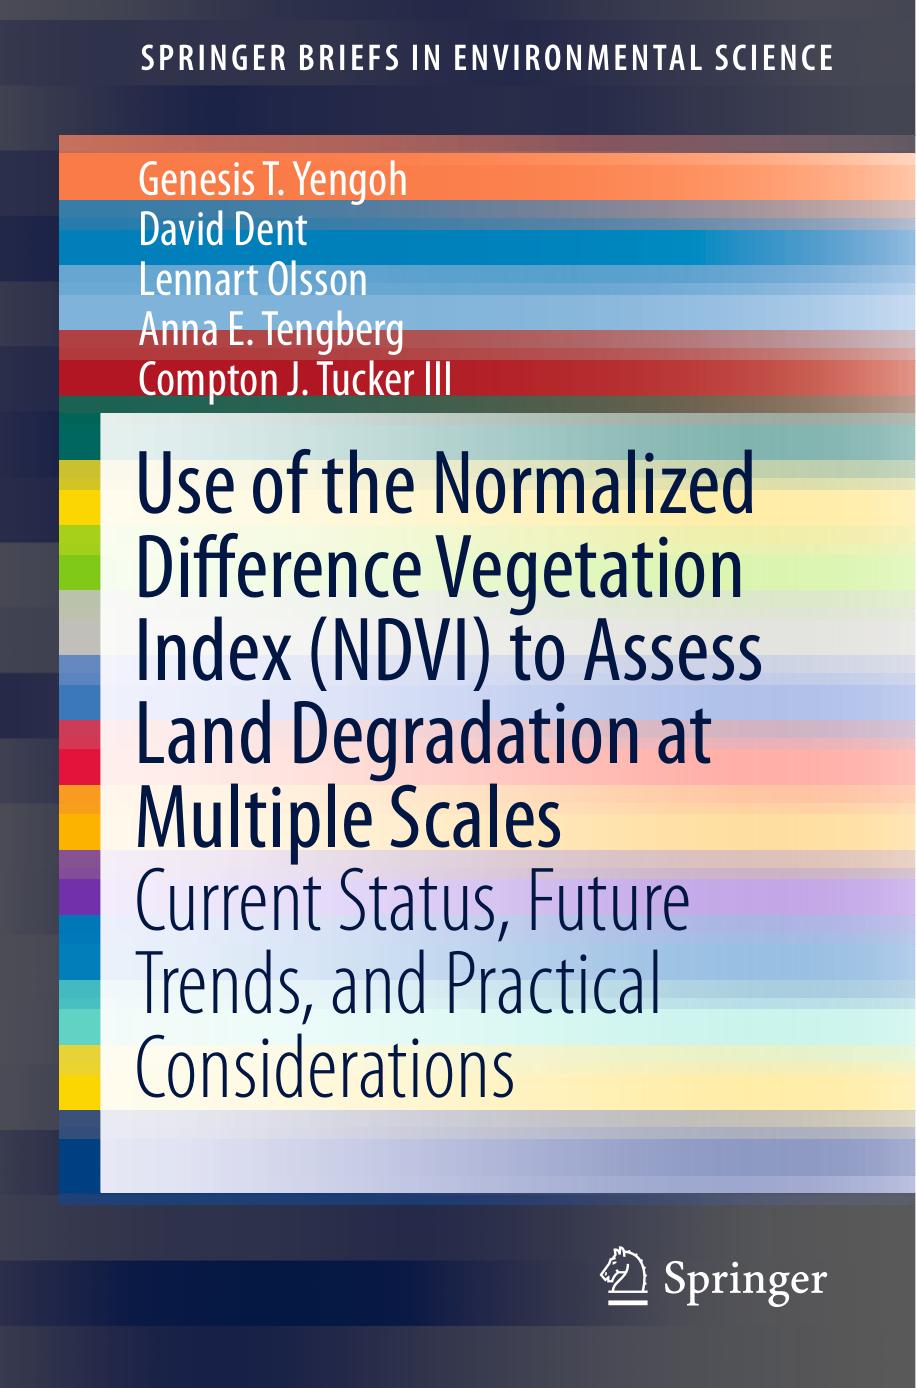 Use of the Normalized Difference Vegetation Index (NDVI) to Assess Land Degradation   2015